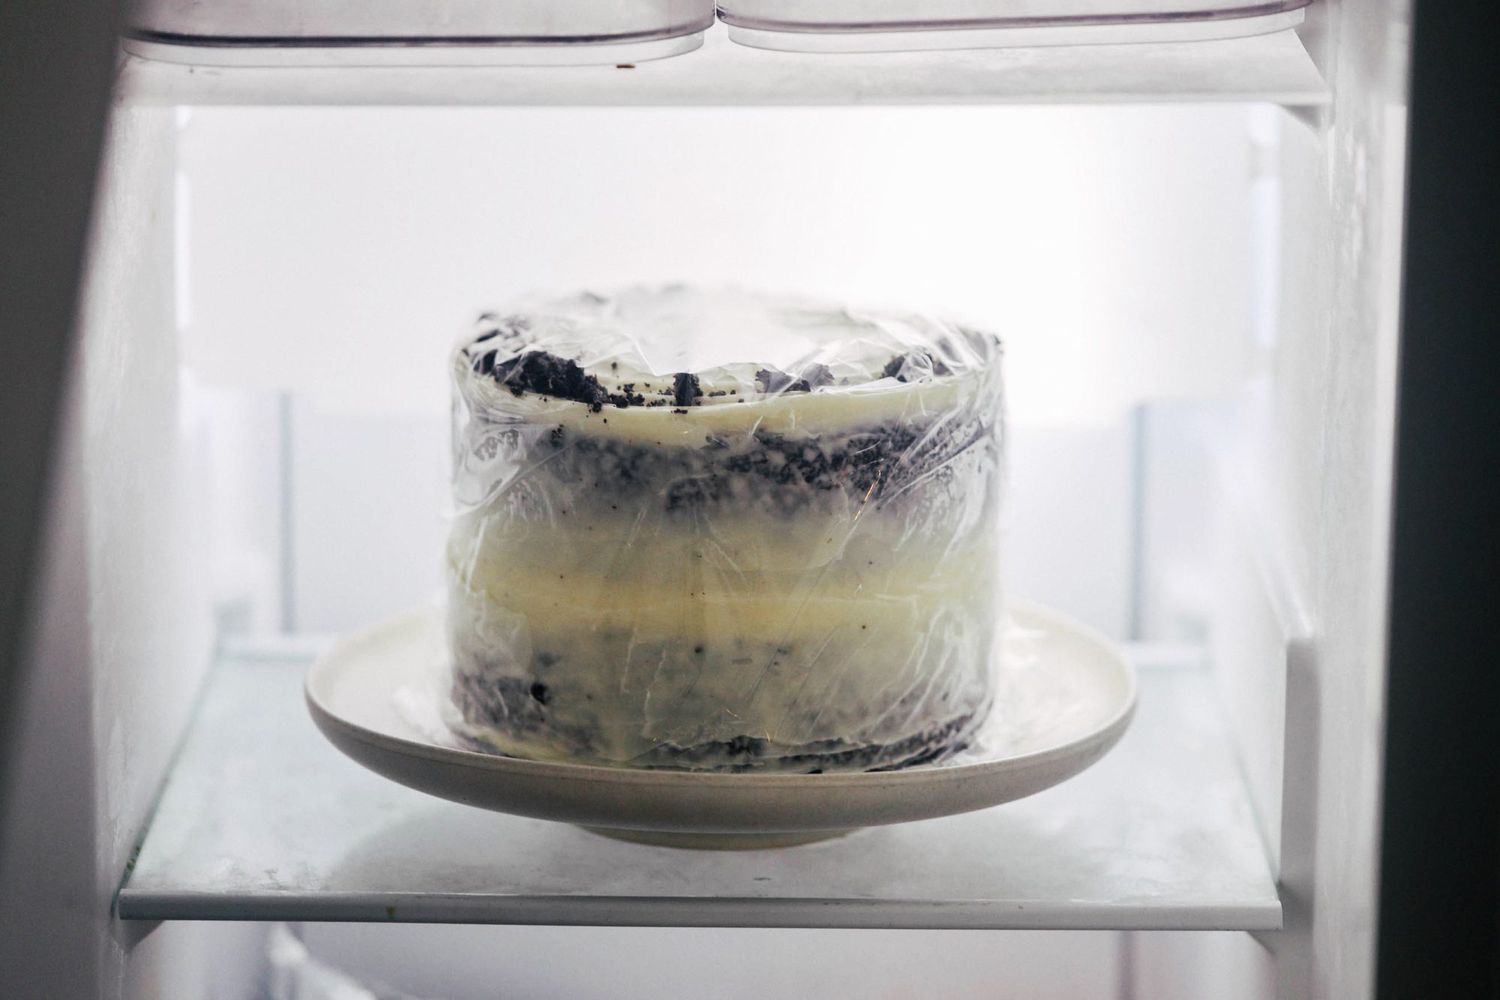 How To Store Cake In Freezer